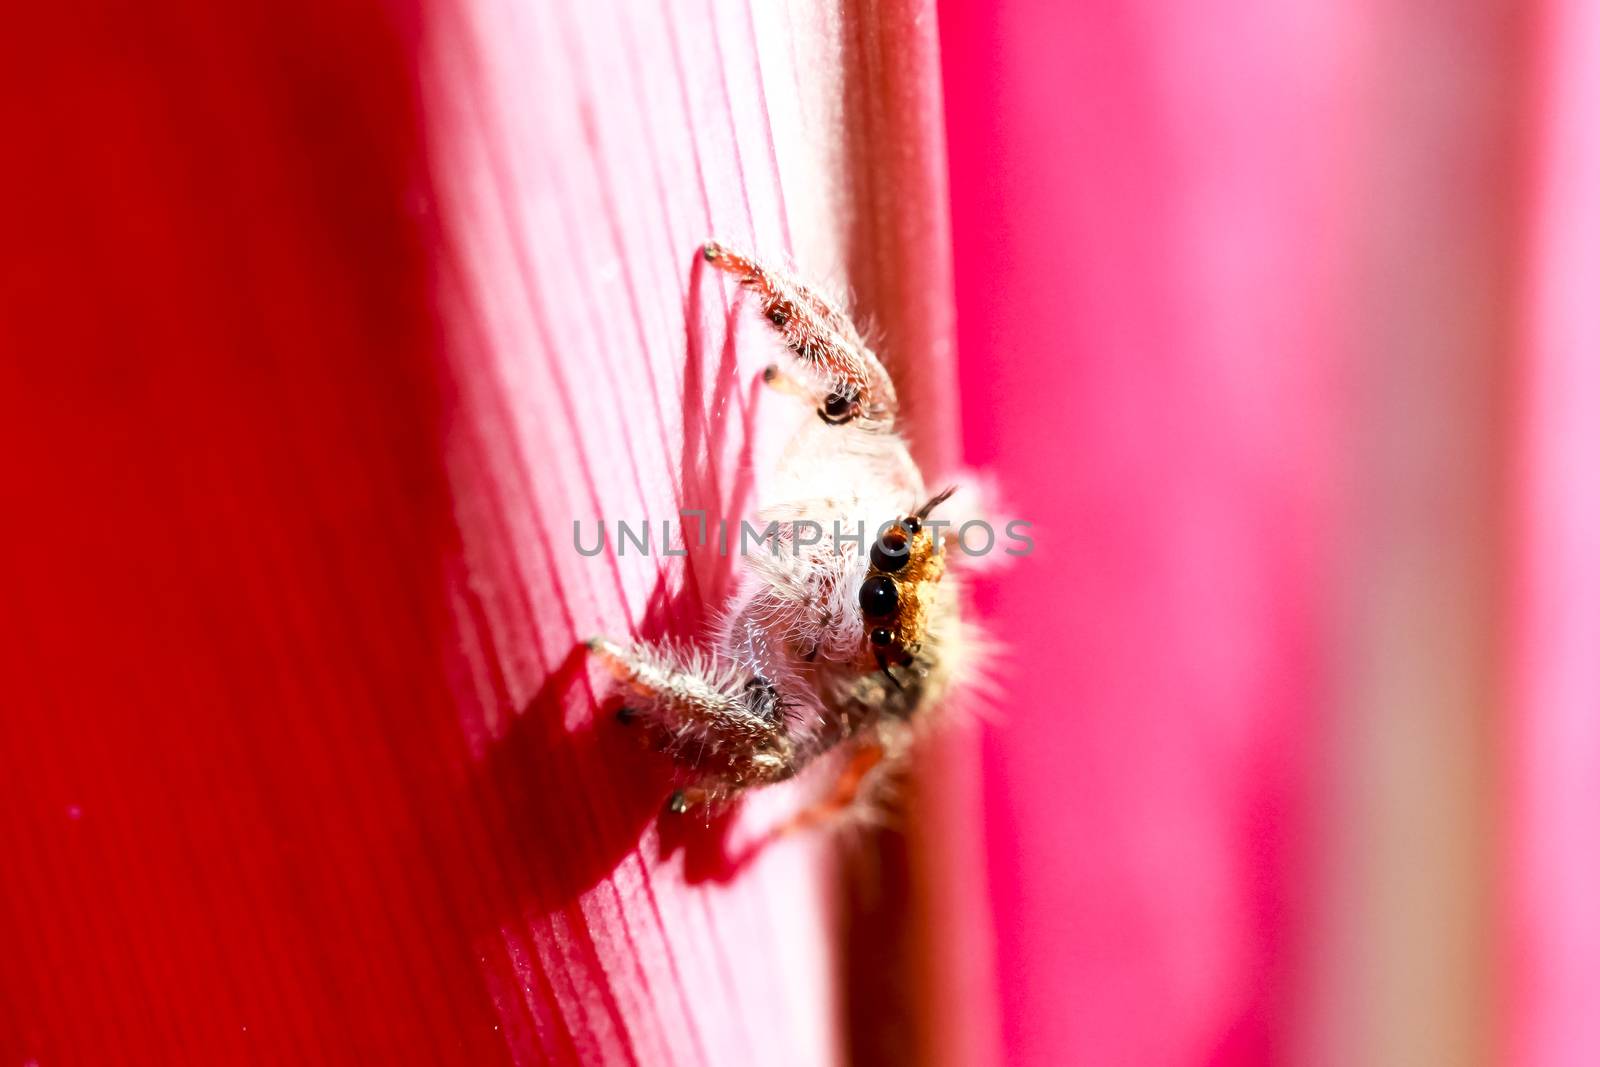 Jumping spider is perched on a red leaf in the morning.